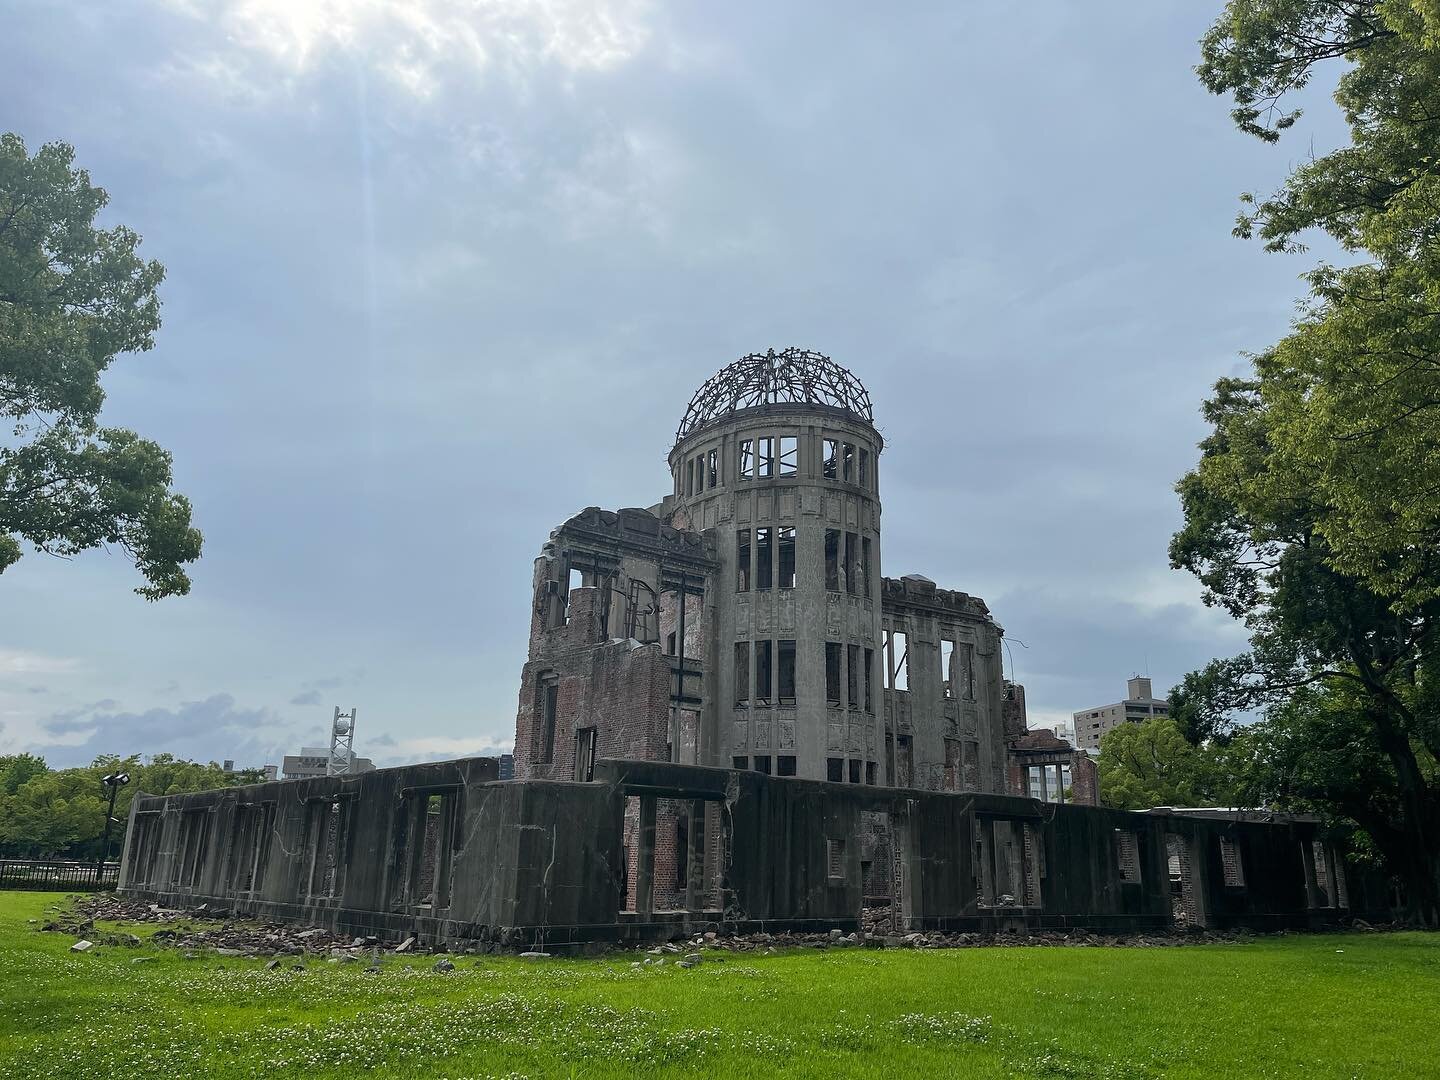 ☀️ Hiroshima ☀️

A city rebuilt and redefined&mdash; embracing its past to become one of the most influential contributors in the atomic world. Loved being around all of the history.

Better late than never, didn&rsquo;t feel right not rounding out t